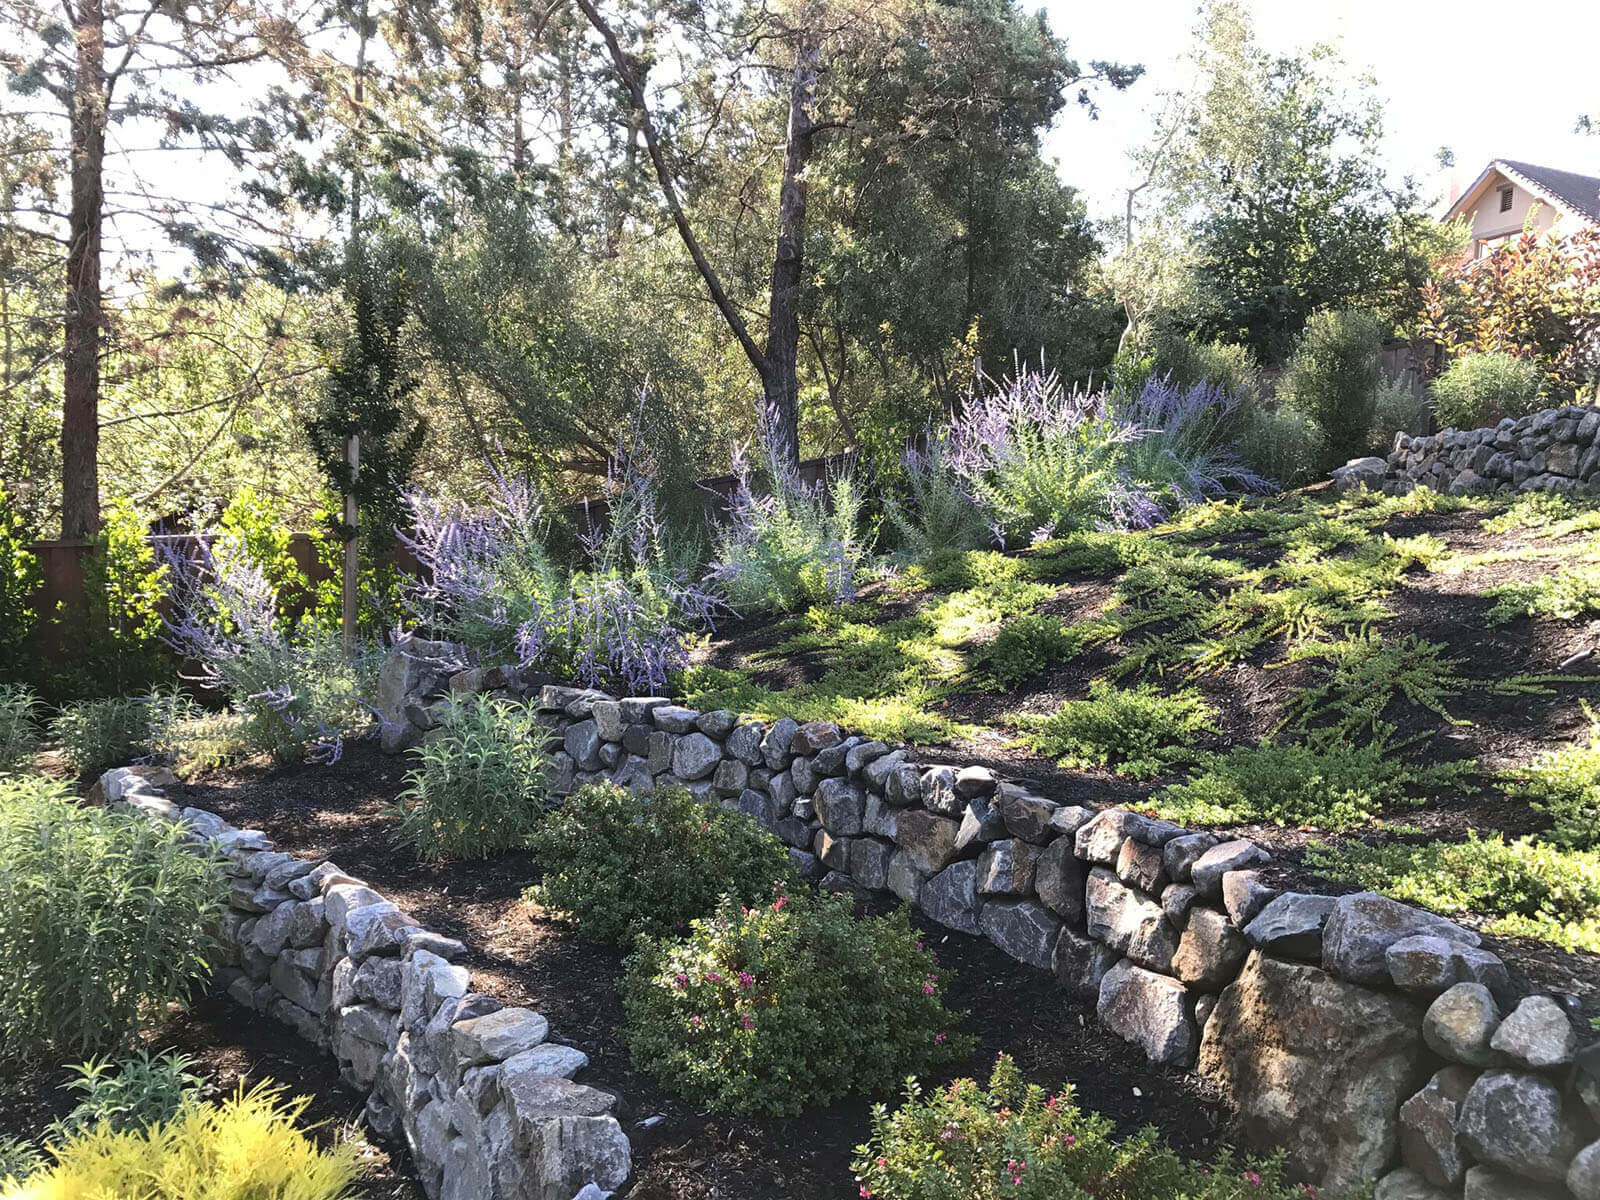 staged rock walled garden with tall lavender, short shrubs, and crawling ground cover